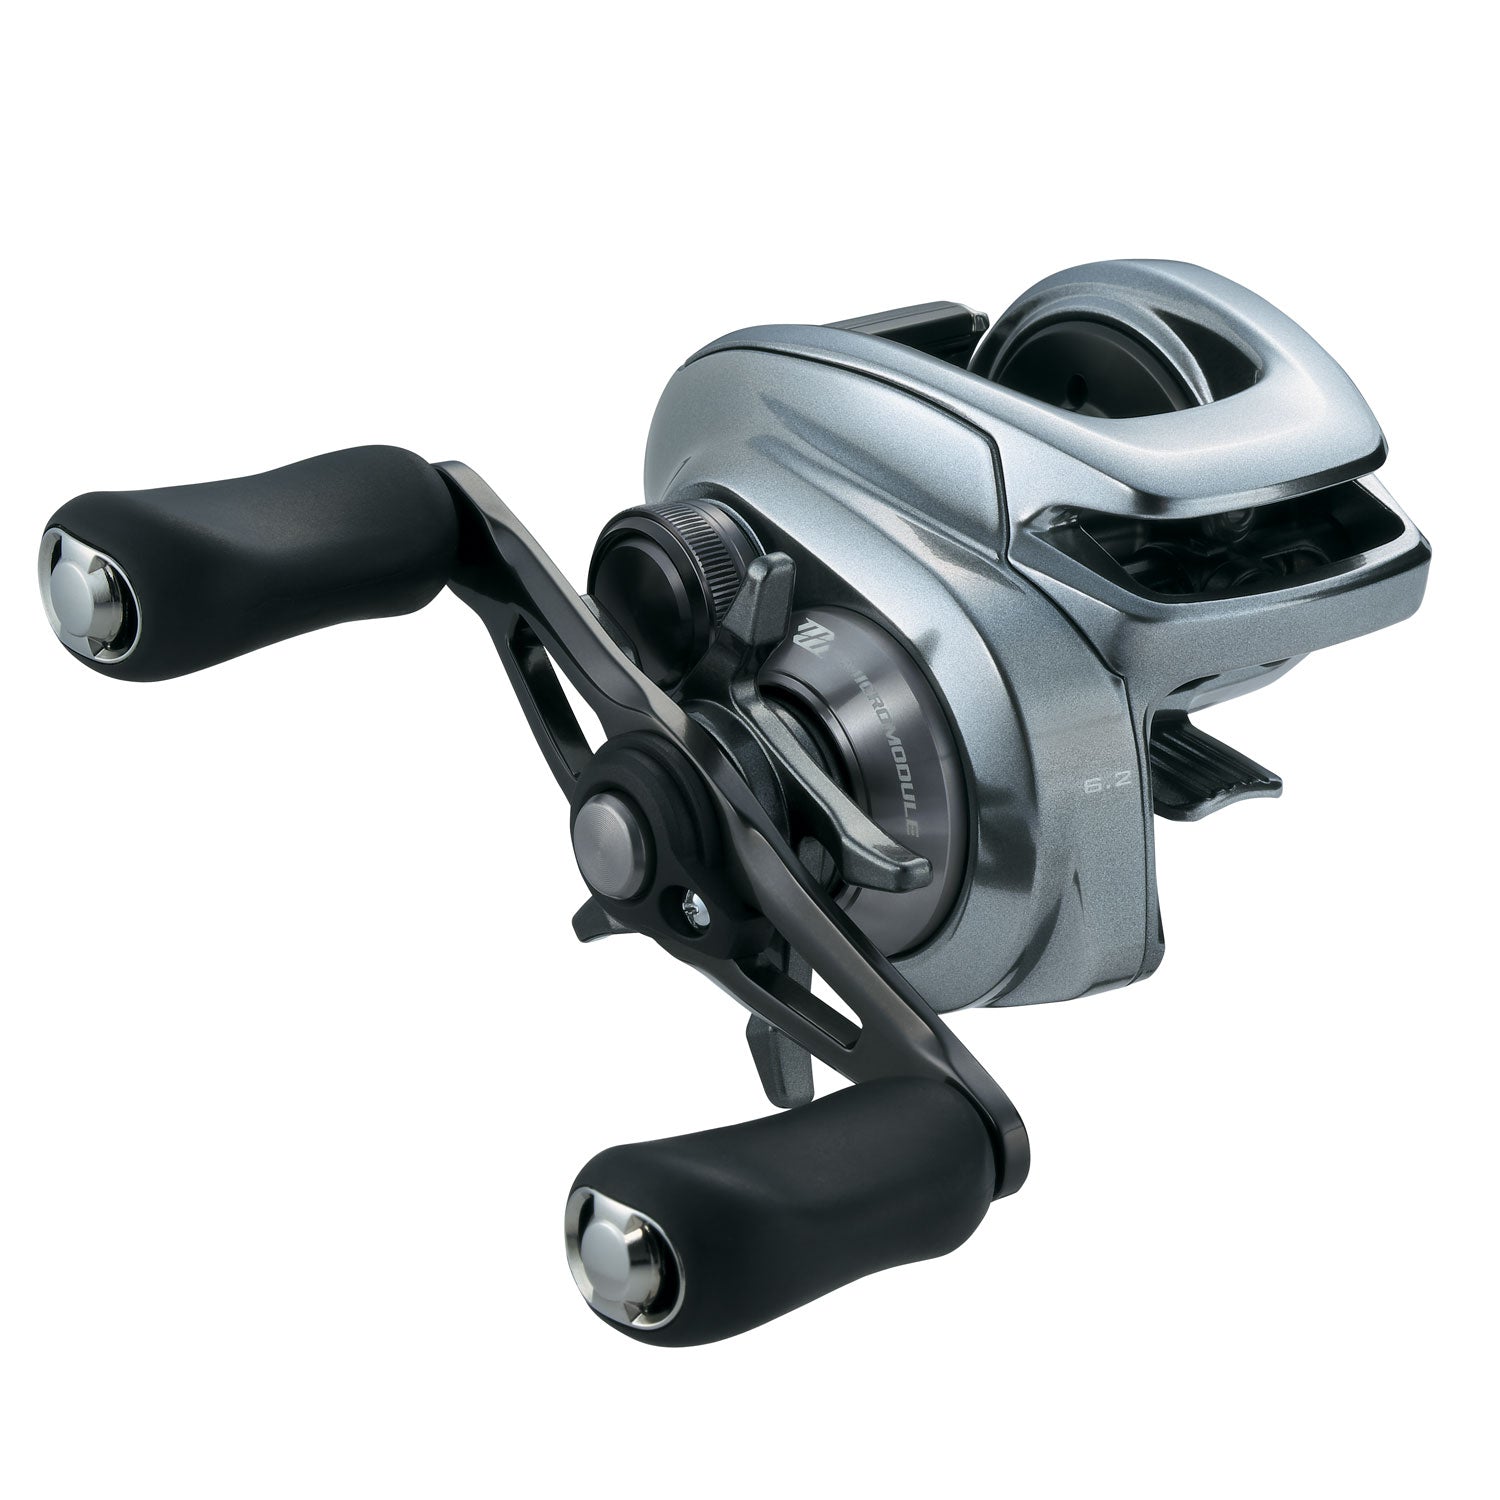 Shimano Curado MGL 150 First Impression - Fishing Rods, Reels, Line, and  Knots - Bass Fishing Forums